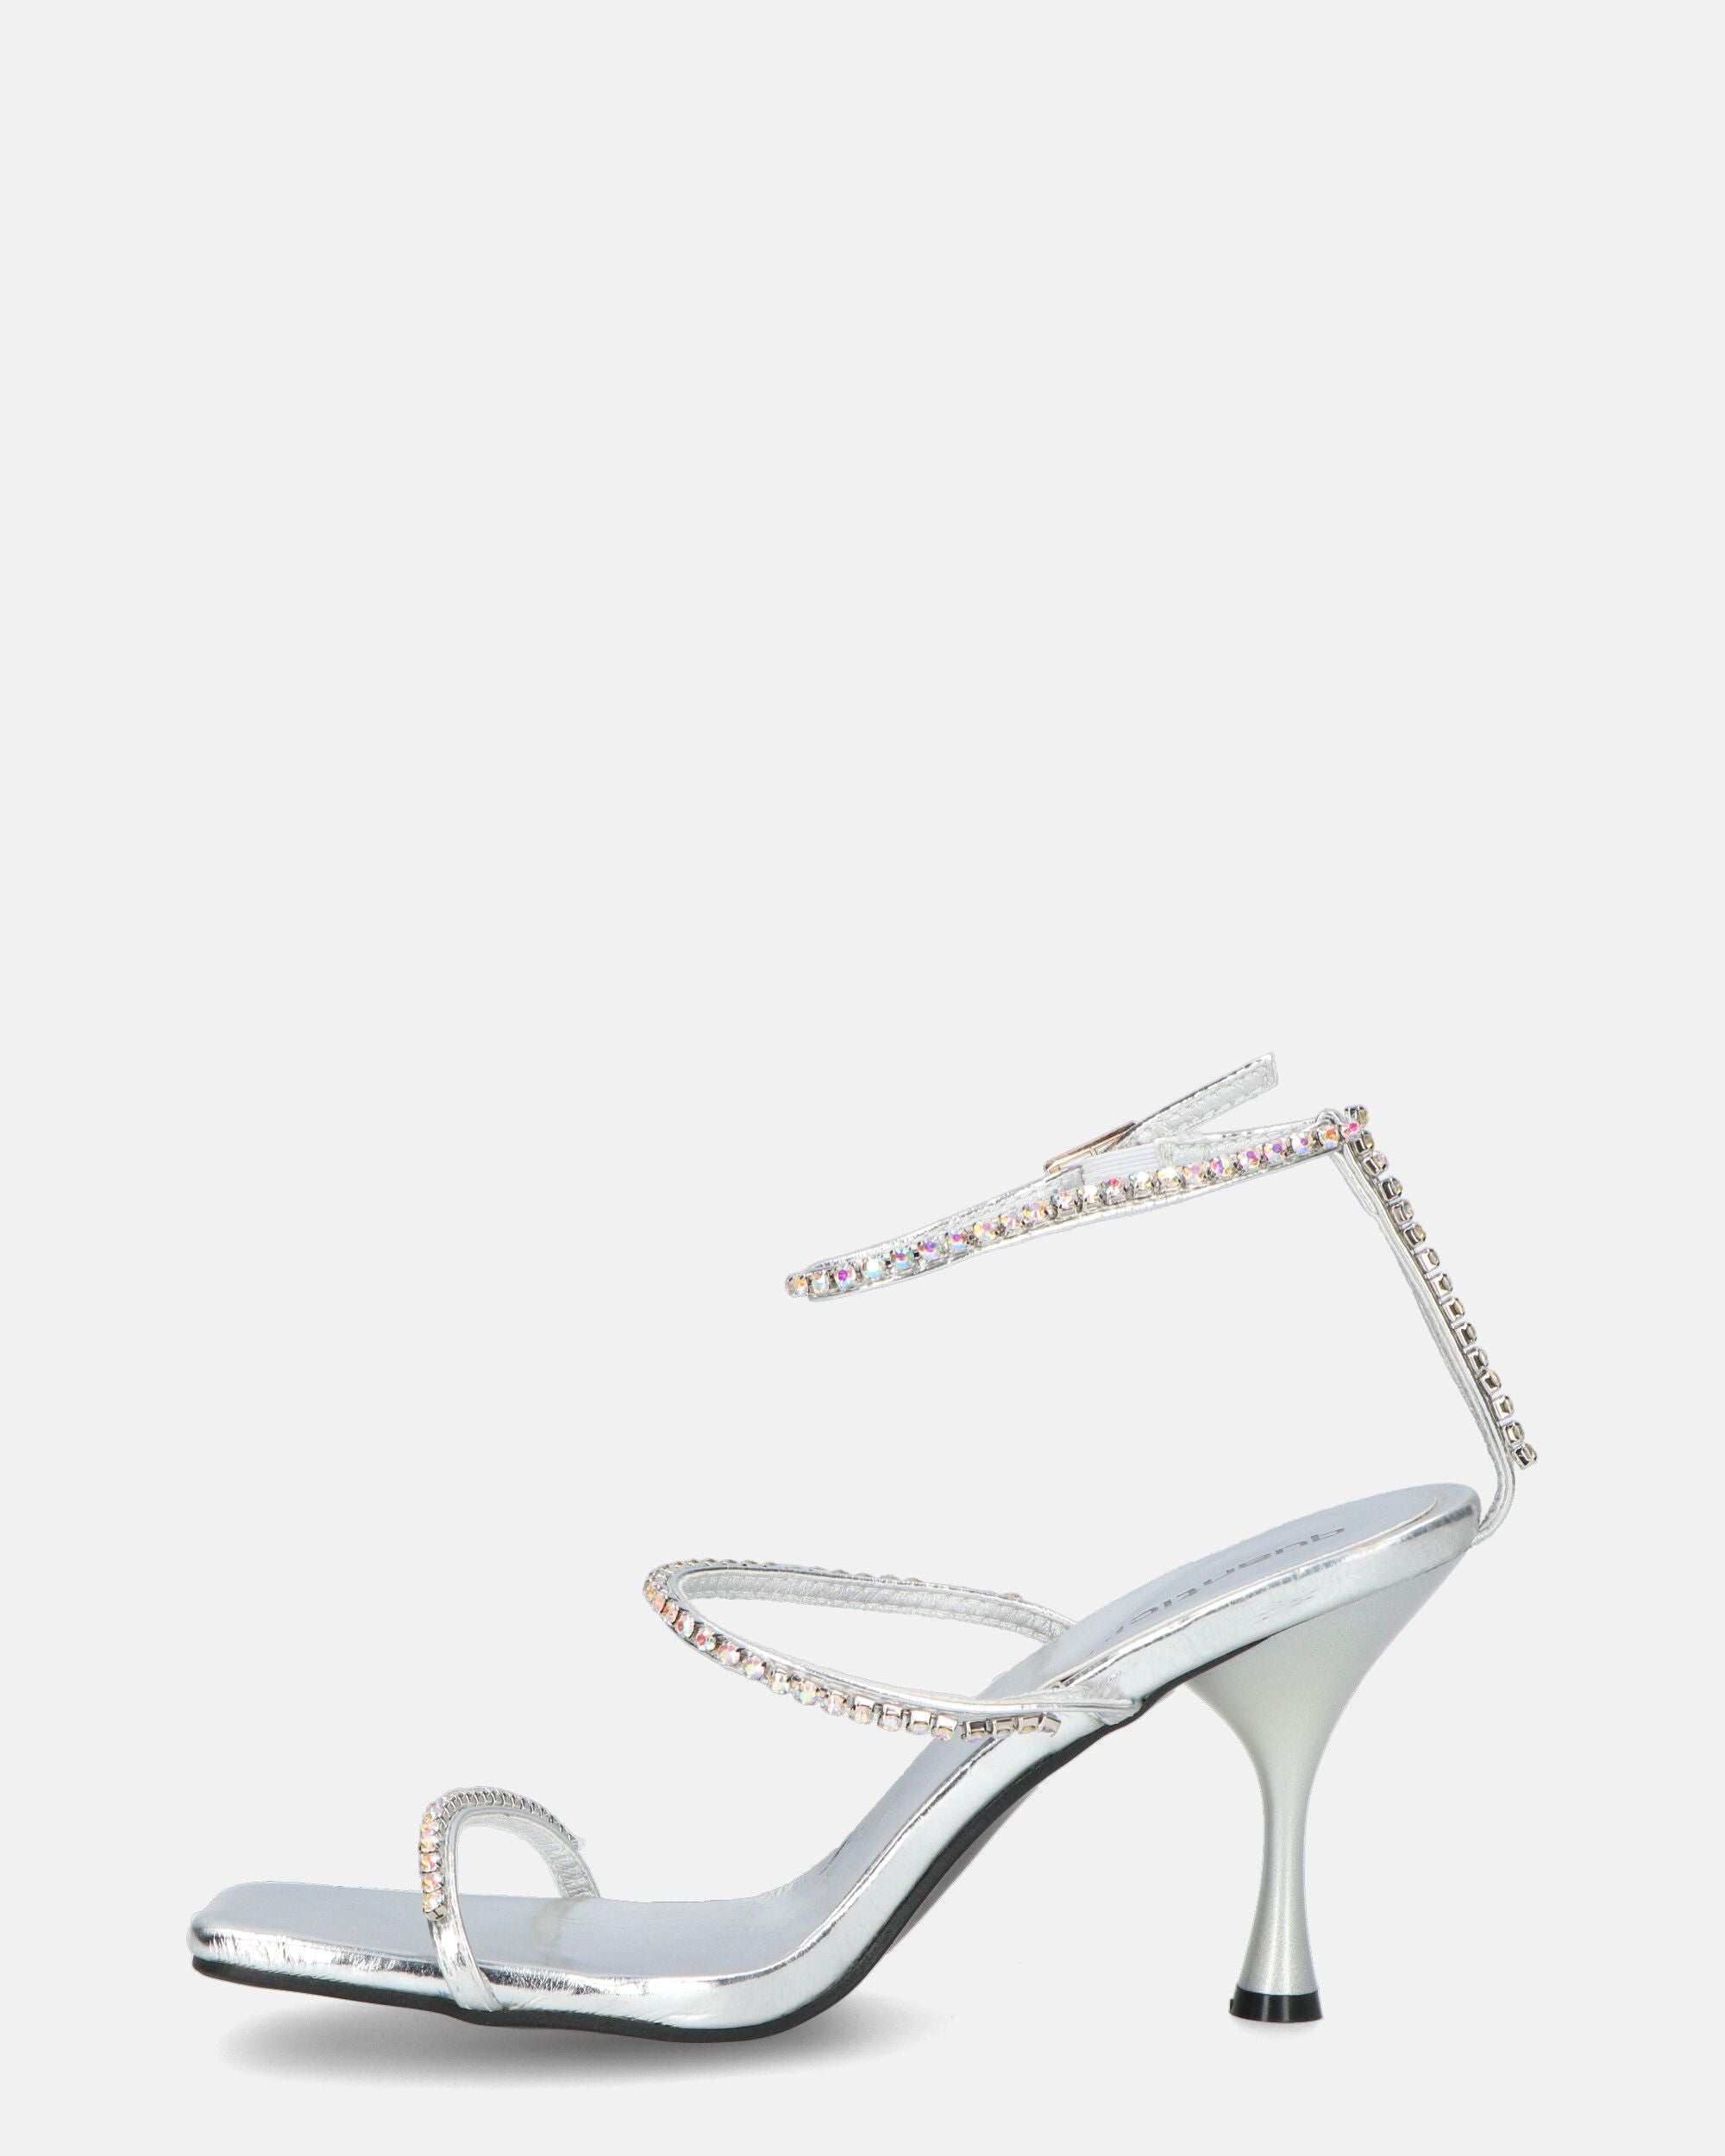 RAHA - glassy silver sandals with gems